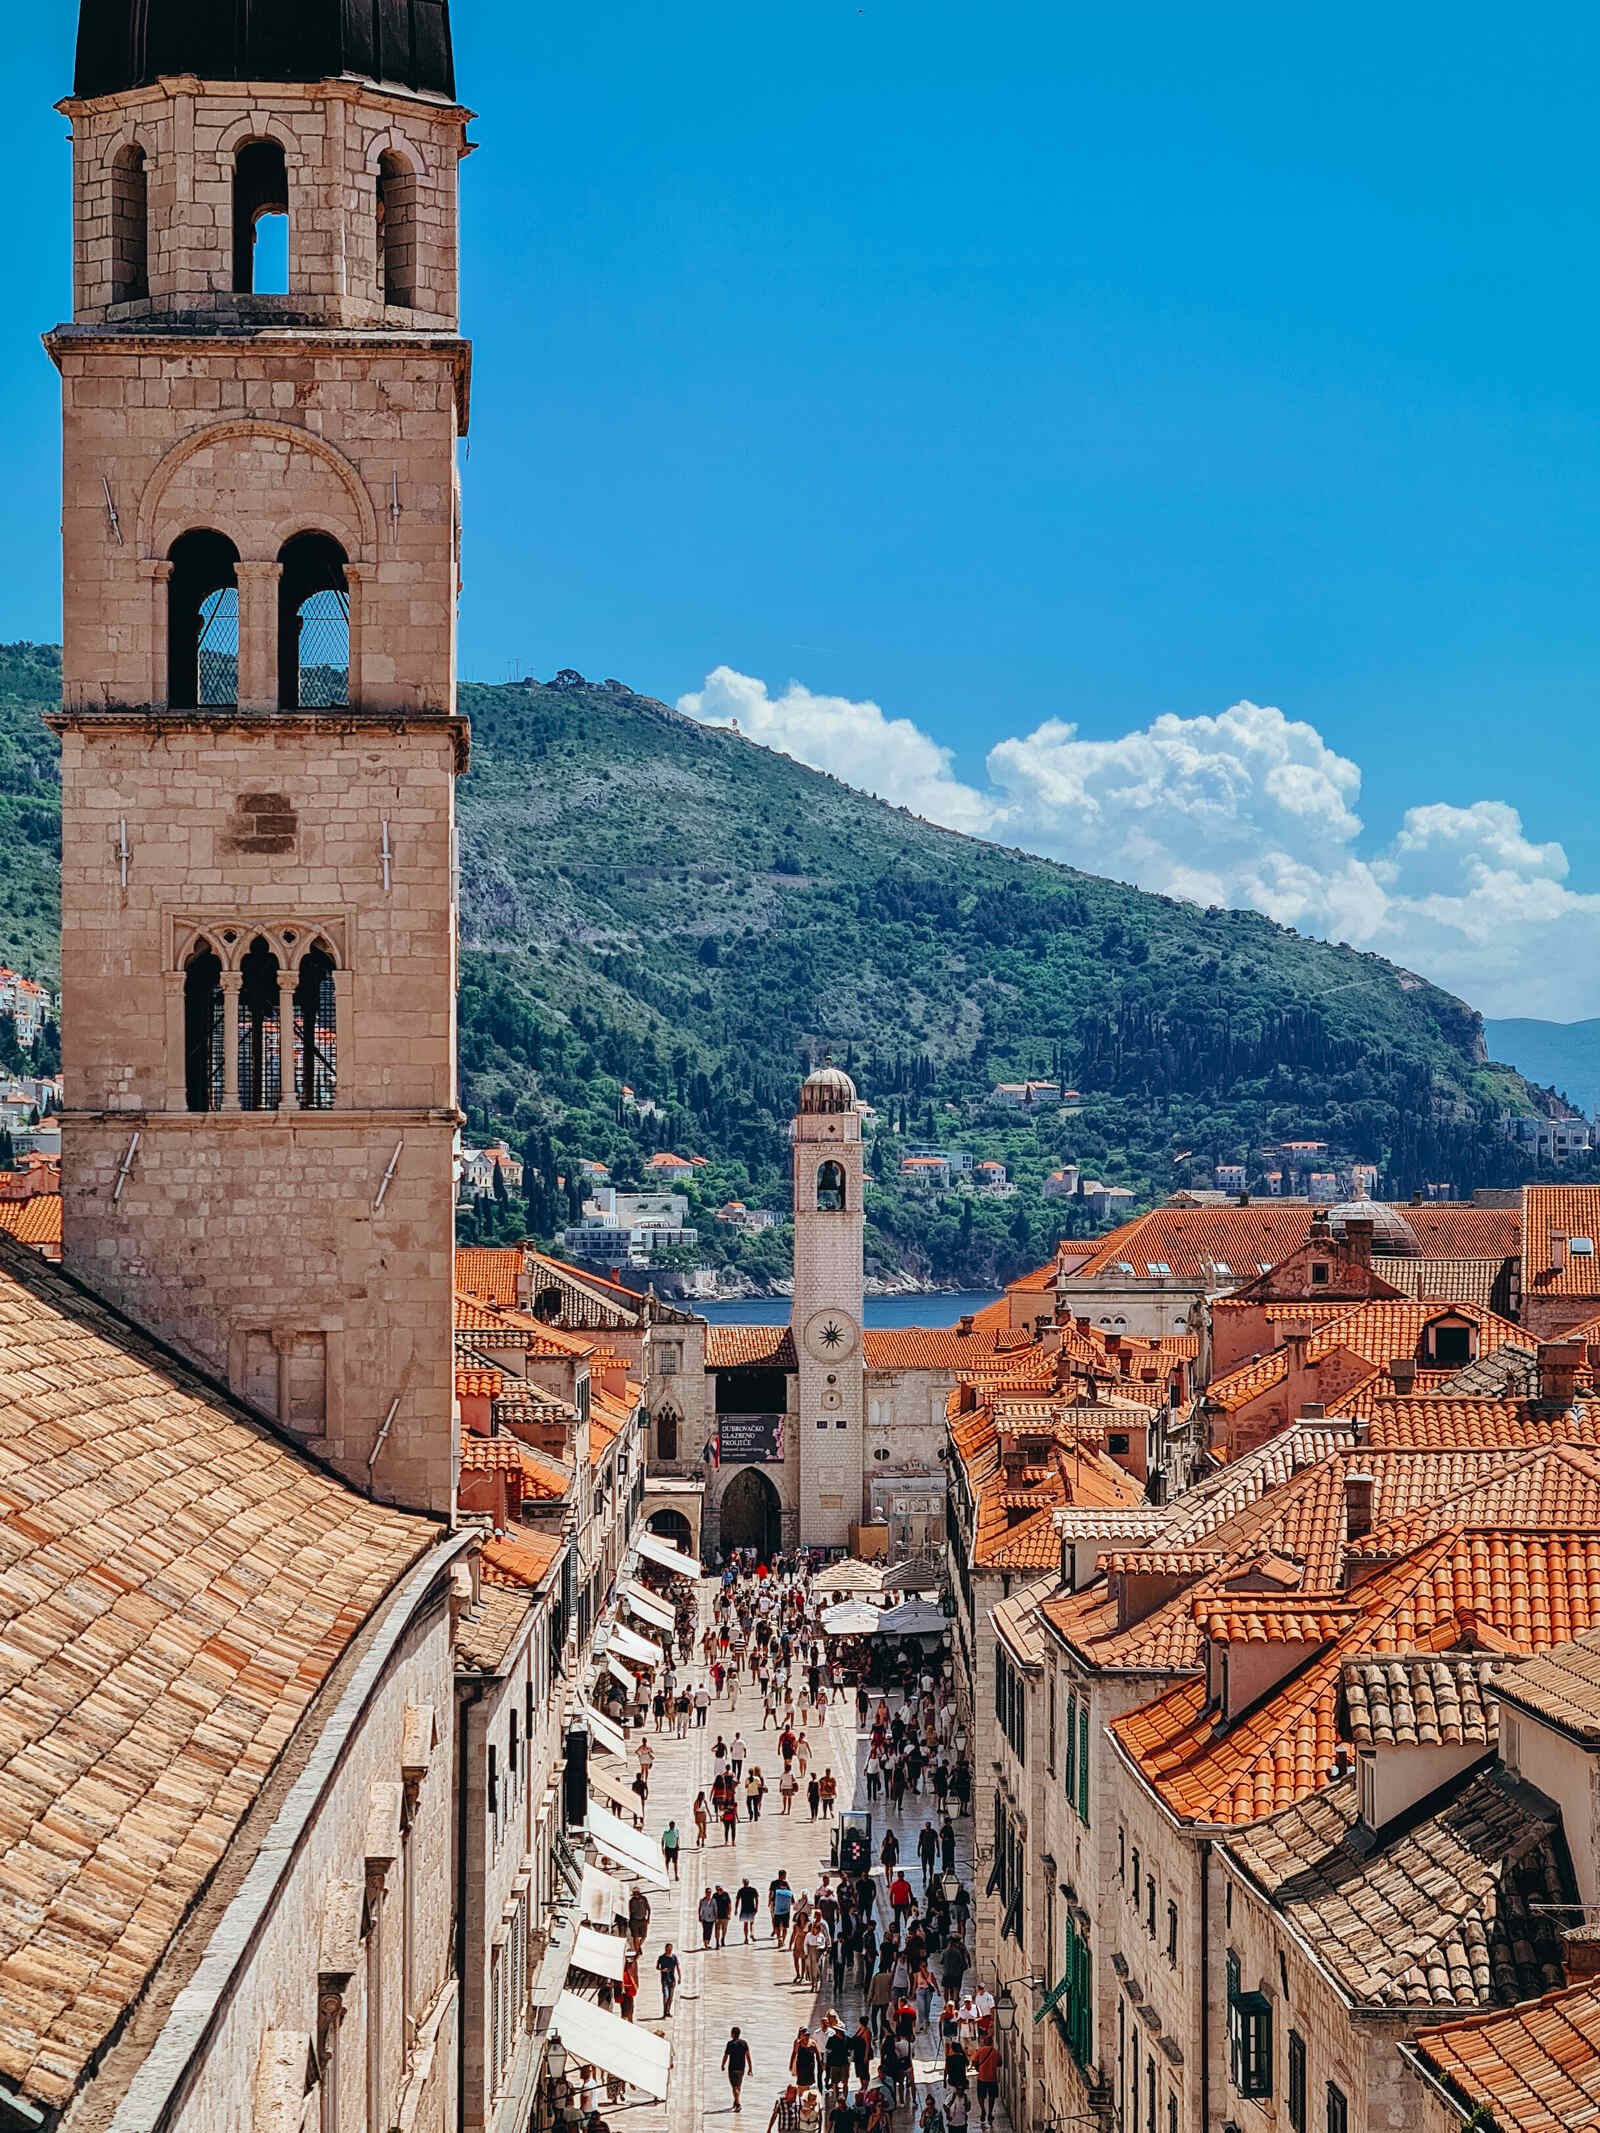 A view from the Dubrovnik city walls looking down the famous Stradun Street in Dubrovnik Old Town. The street is full of people walking and lined with stone houses and orange rooftops. There is a church bell tower in the foreground and at the bottom